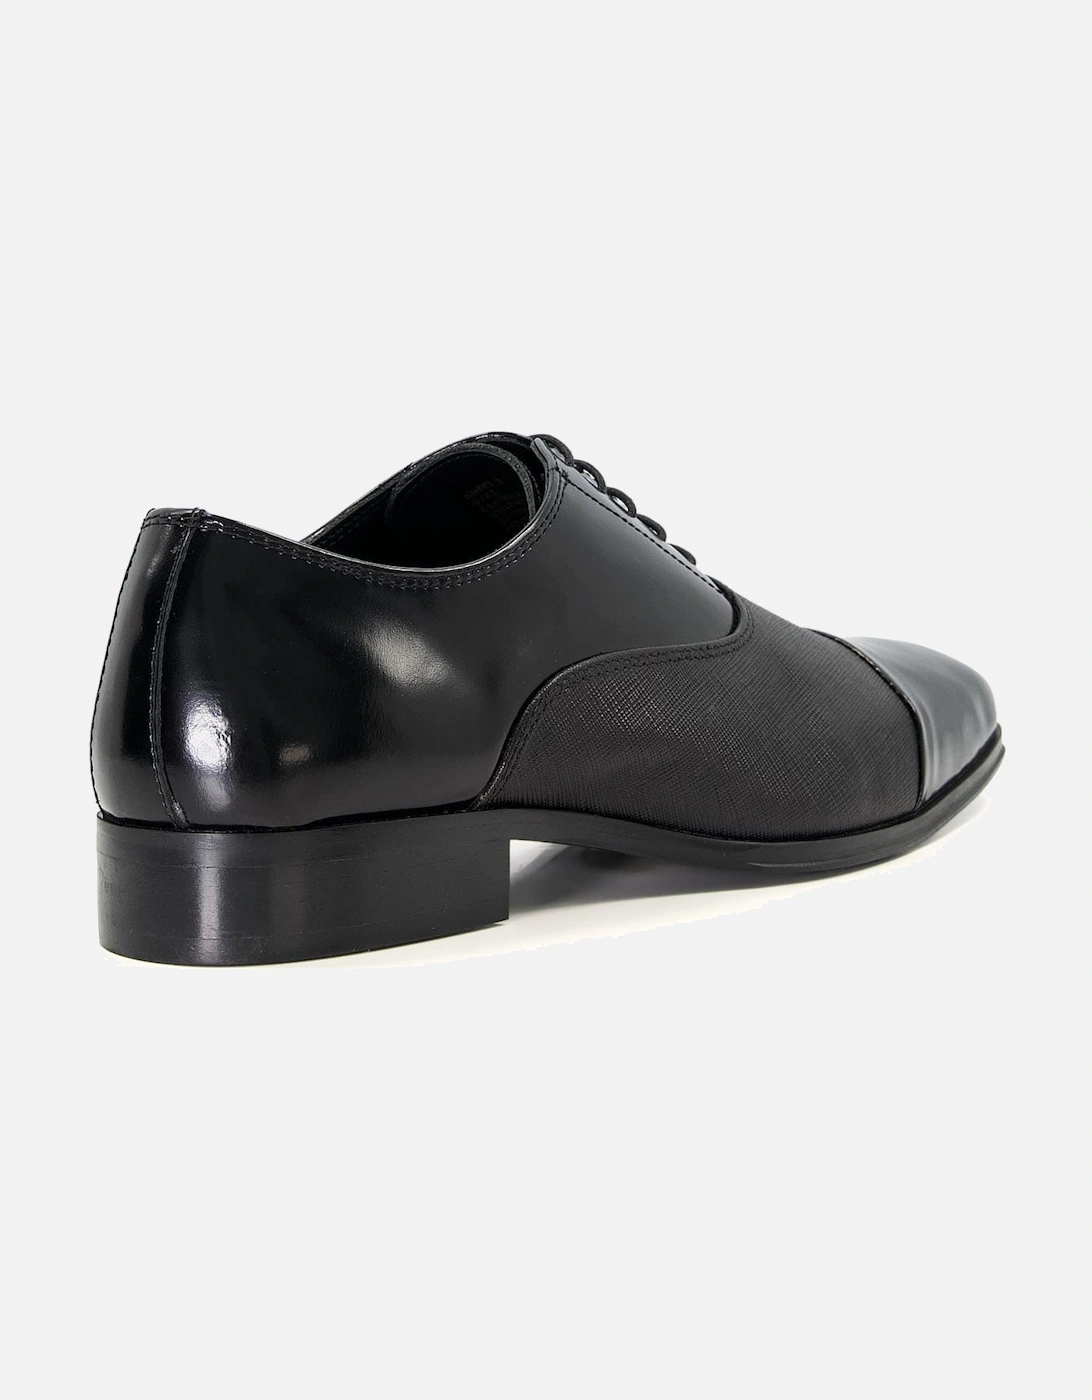 Mens Sheet 2 - Embossed Leather Oxford Shoes